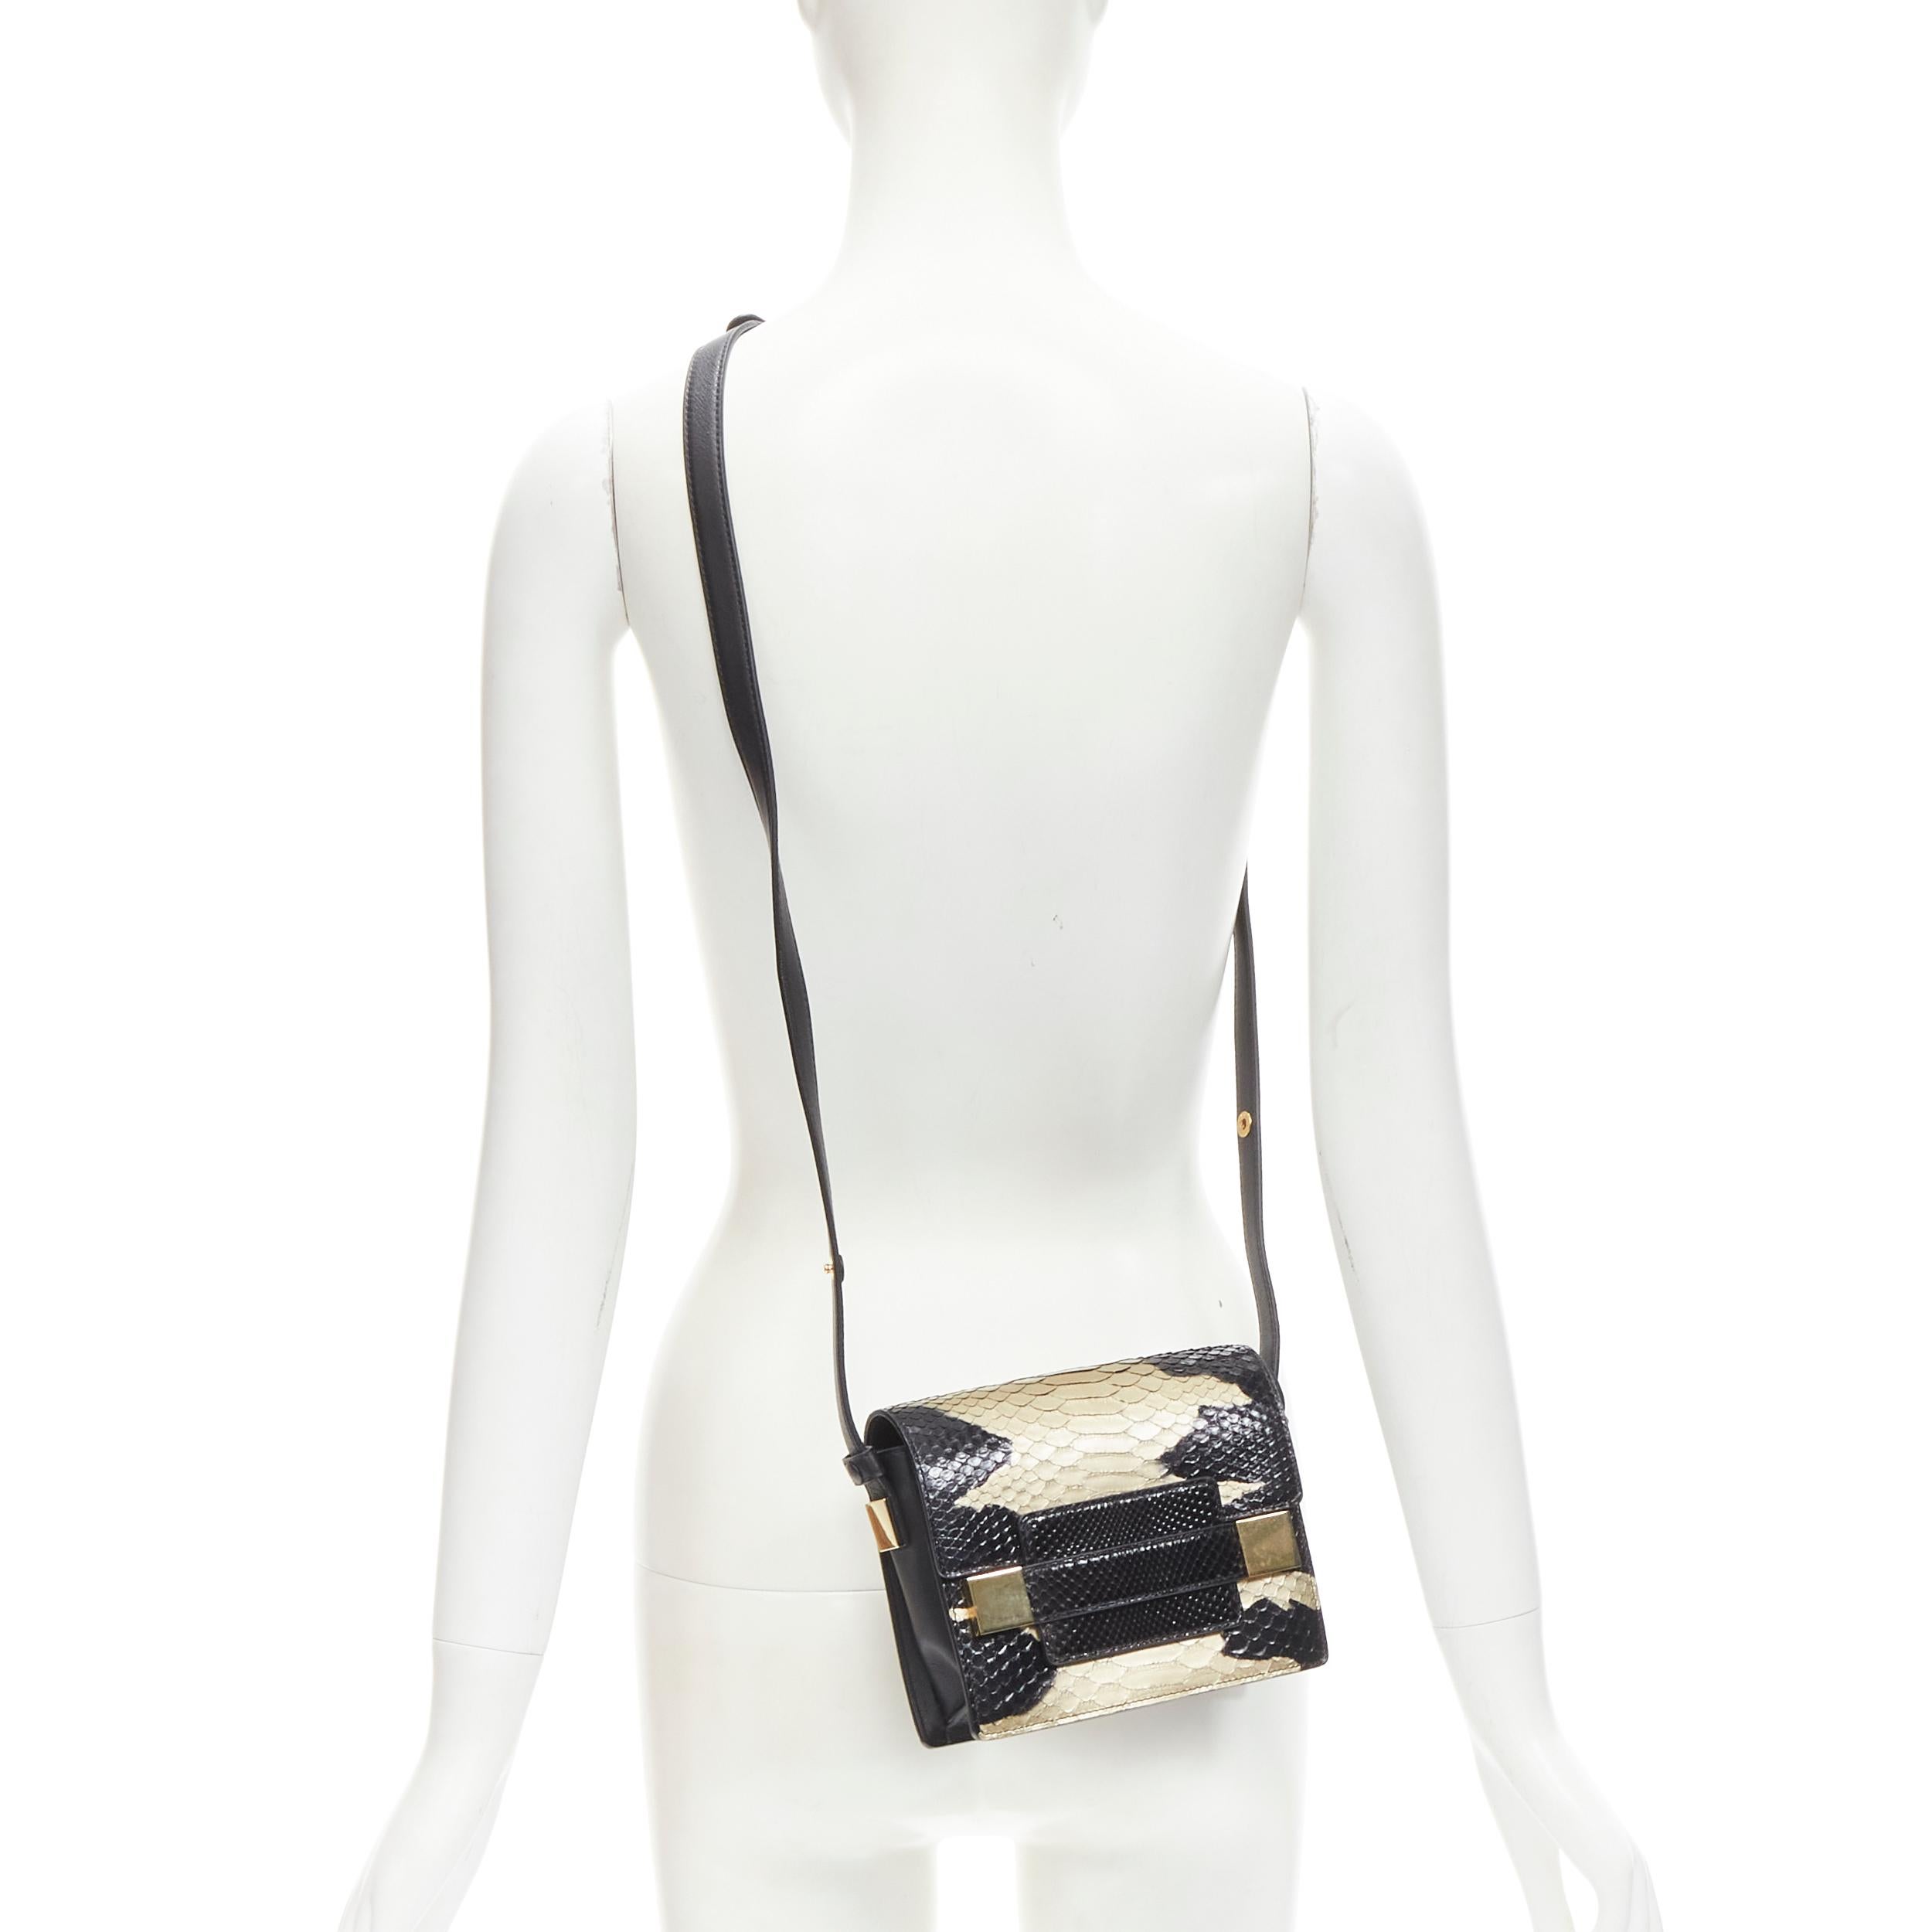 rare DELVAUX Le Madame black gold spray painted scaled leather crossbody box bag
Brand: Delvaux
Model: Le Madame
Material: Leather
Color: Black
Closure: Flap
Extra Detail: Black genuine scaled glossy leather with metallic gold spray painted over it.